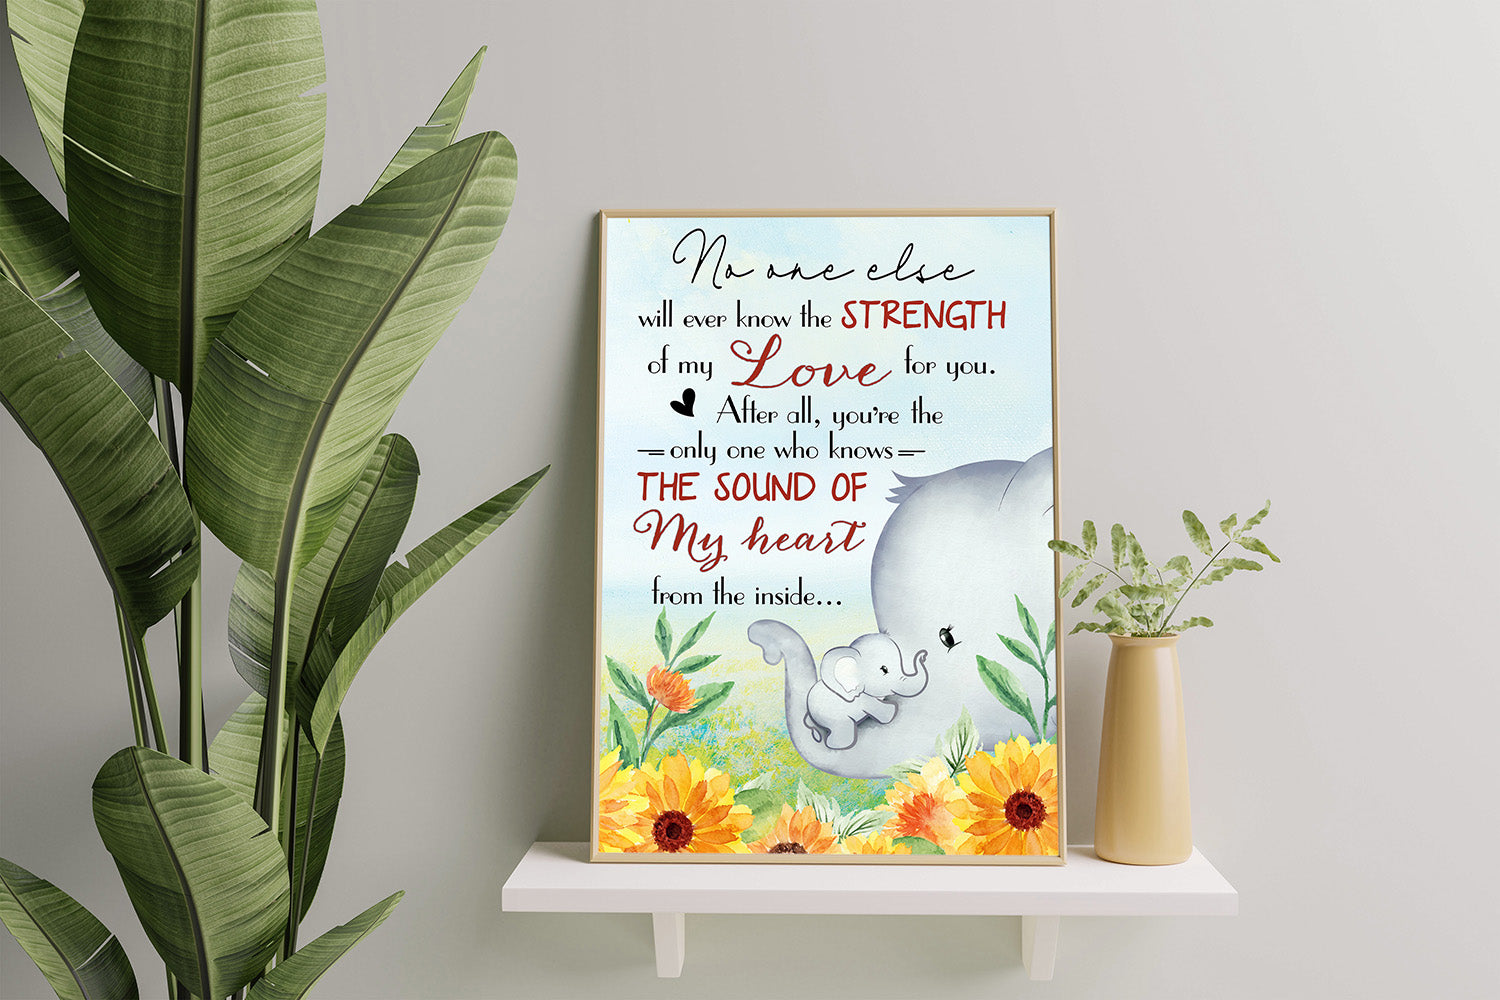 Poster Elephants, No One Else Will Ever Know The Strength of My Love for You-HH0308